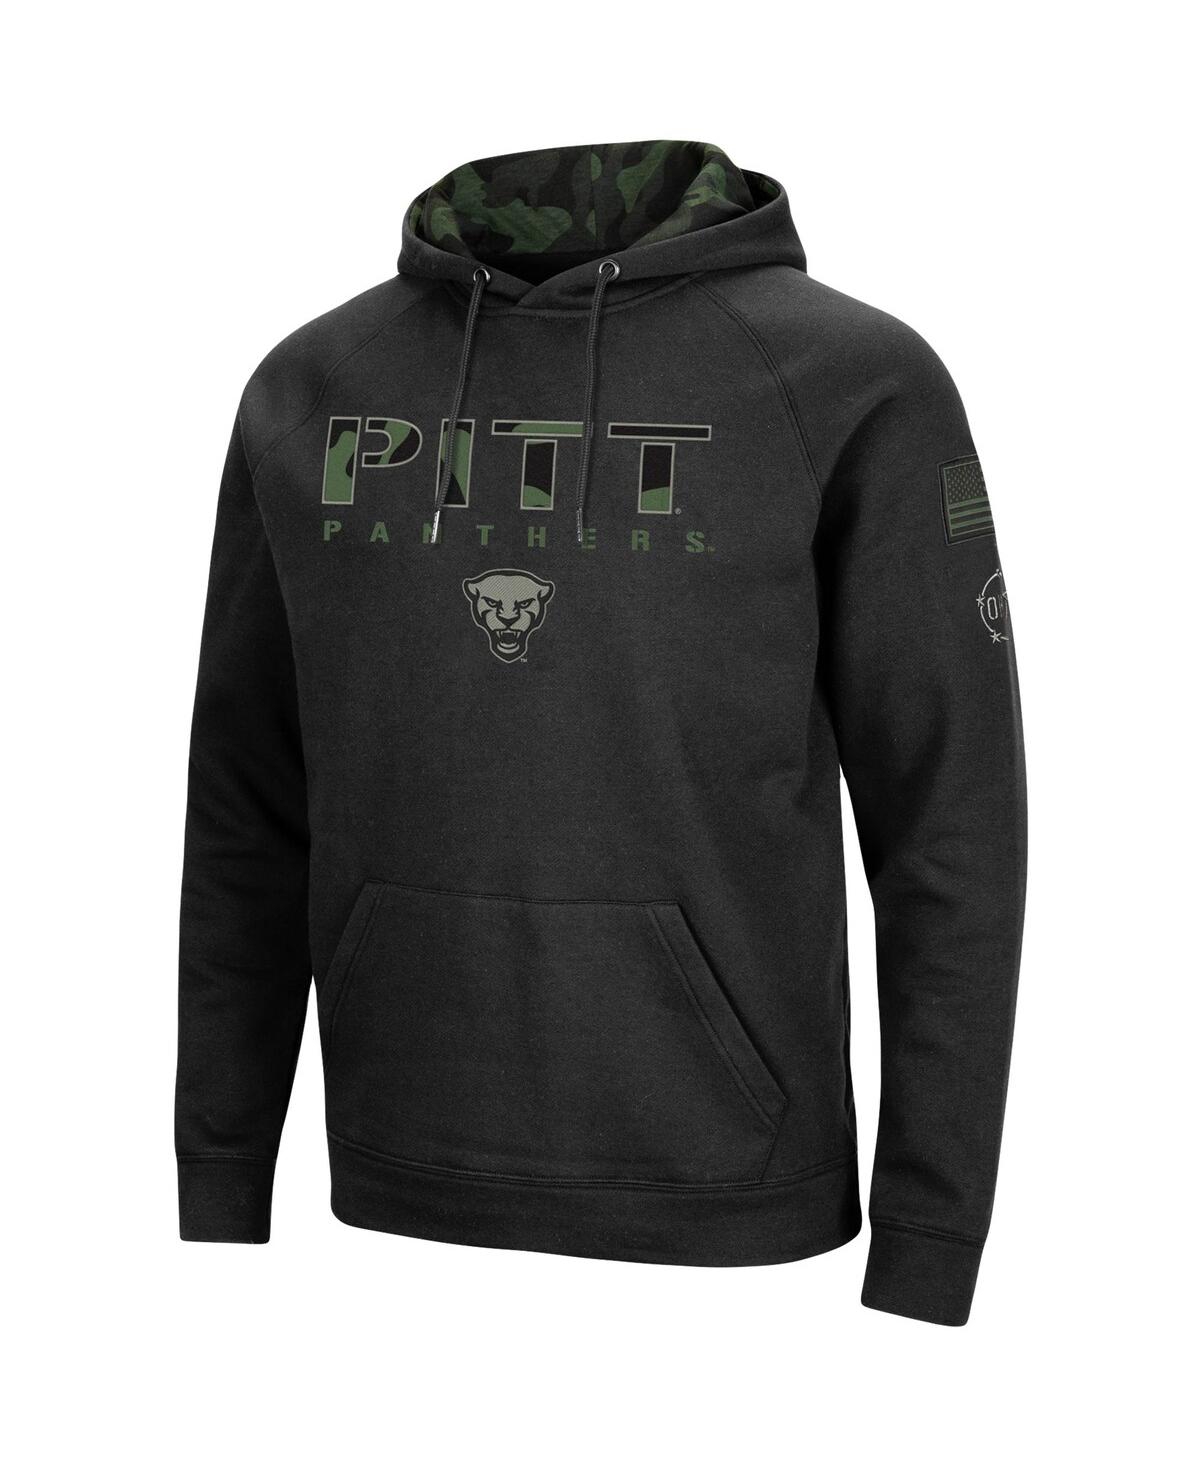 Shop Colosseum Men's  Black Pitt Panthers Oht Military-inspired Appreciation Camo Pullover Hoodie